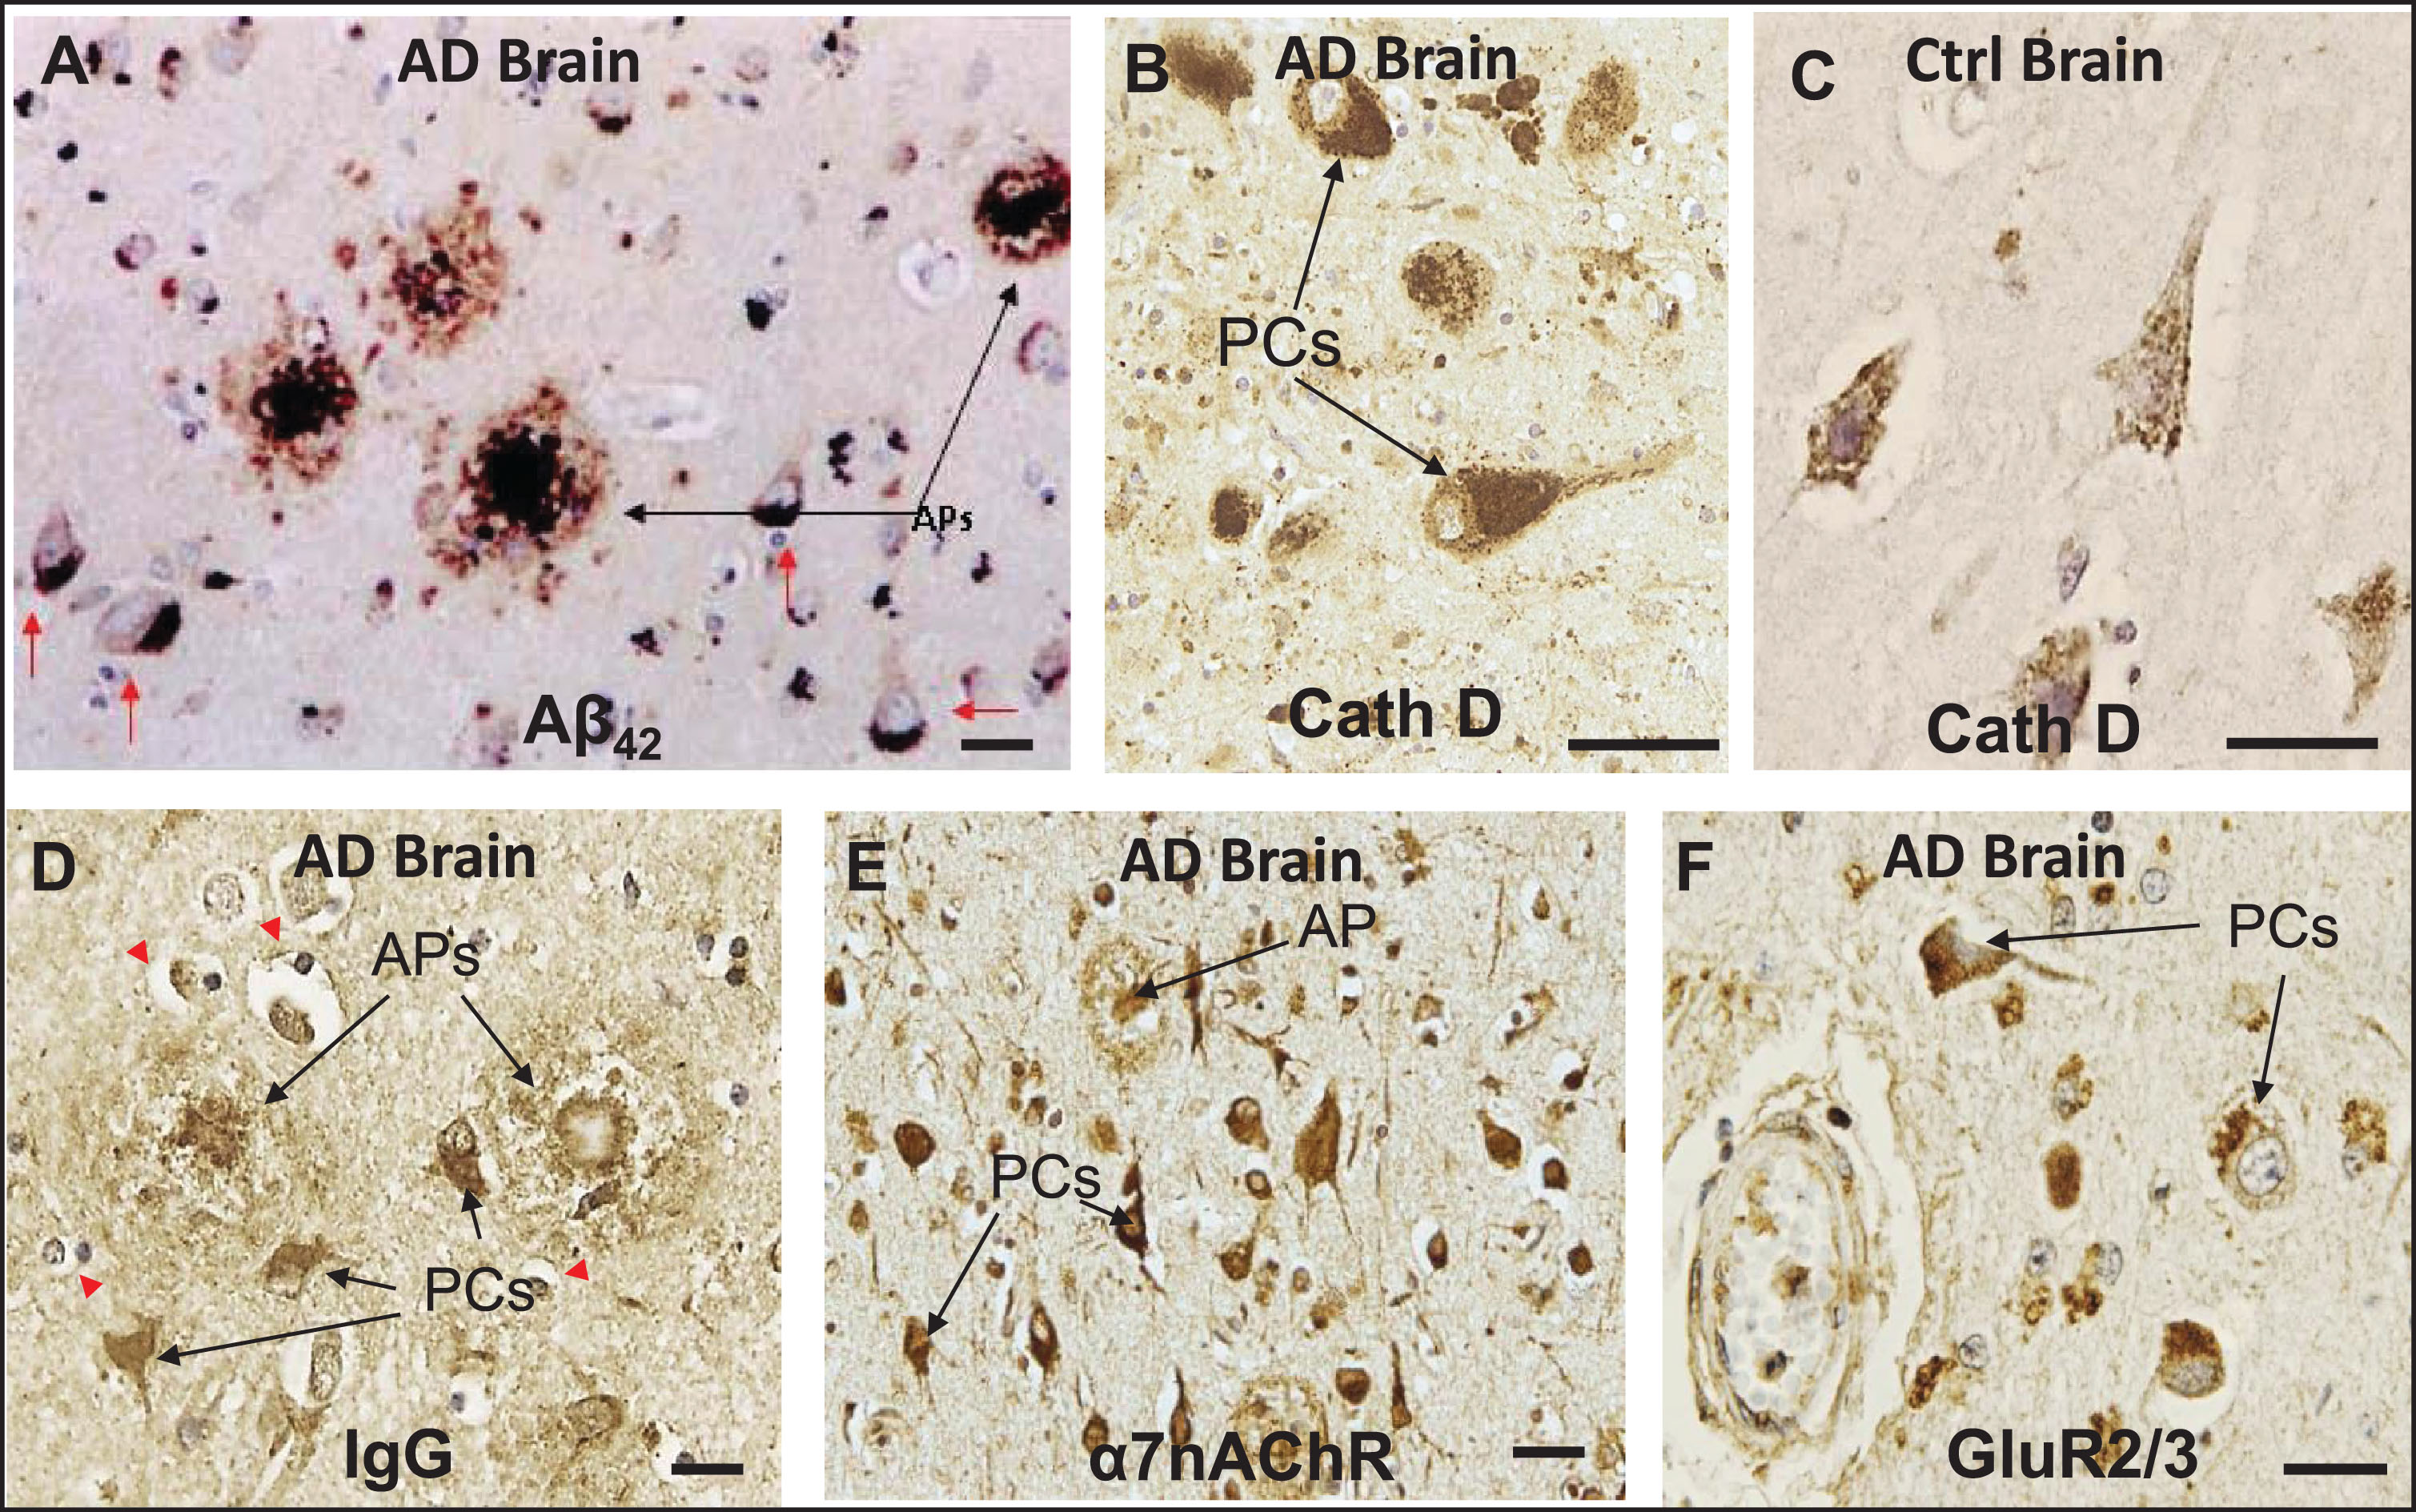 In neurons of AD brains, exogenous Aβ42 and IgG are internalized along with key cell surface proteins and deposited within the lysosomal compartment. A) IHC of a histological section of cerebral cortex of AD brain showing deposition of Aβ42 in amyloid plaques (APs) and in pyramidal cells (PCs). B, C) Cathepsin D (CathD) immunostaining reveals a great expansion of the lysosomal compartment in PCs in AD brains over that of controls. D) Section of AD brain showing preferential affinity of IgG for certain PCs and APs, along with adjacent non-reactive, IgG immuno-negative cells. E) IHC shows intense α7nAChR-positive immunostaining in PCs, and α7nAChR was also detected throughout dense-core APs, supporting the possibility that at least some APs are derived from the death and lysis of local Ig- and Aβ42-overburdened PCs. F) A similar localization pattern was seen in PCs for GluR2/3, a surface receptor found with intracellular distribution, in the vicinity of the cerebrovasculature. Red arrows, Aβ42-burdened neurons. Red arrowheads, IgG immuno-negative cells. Scale bar = 20 μm.